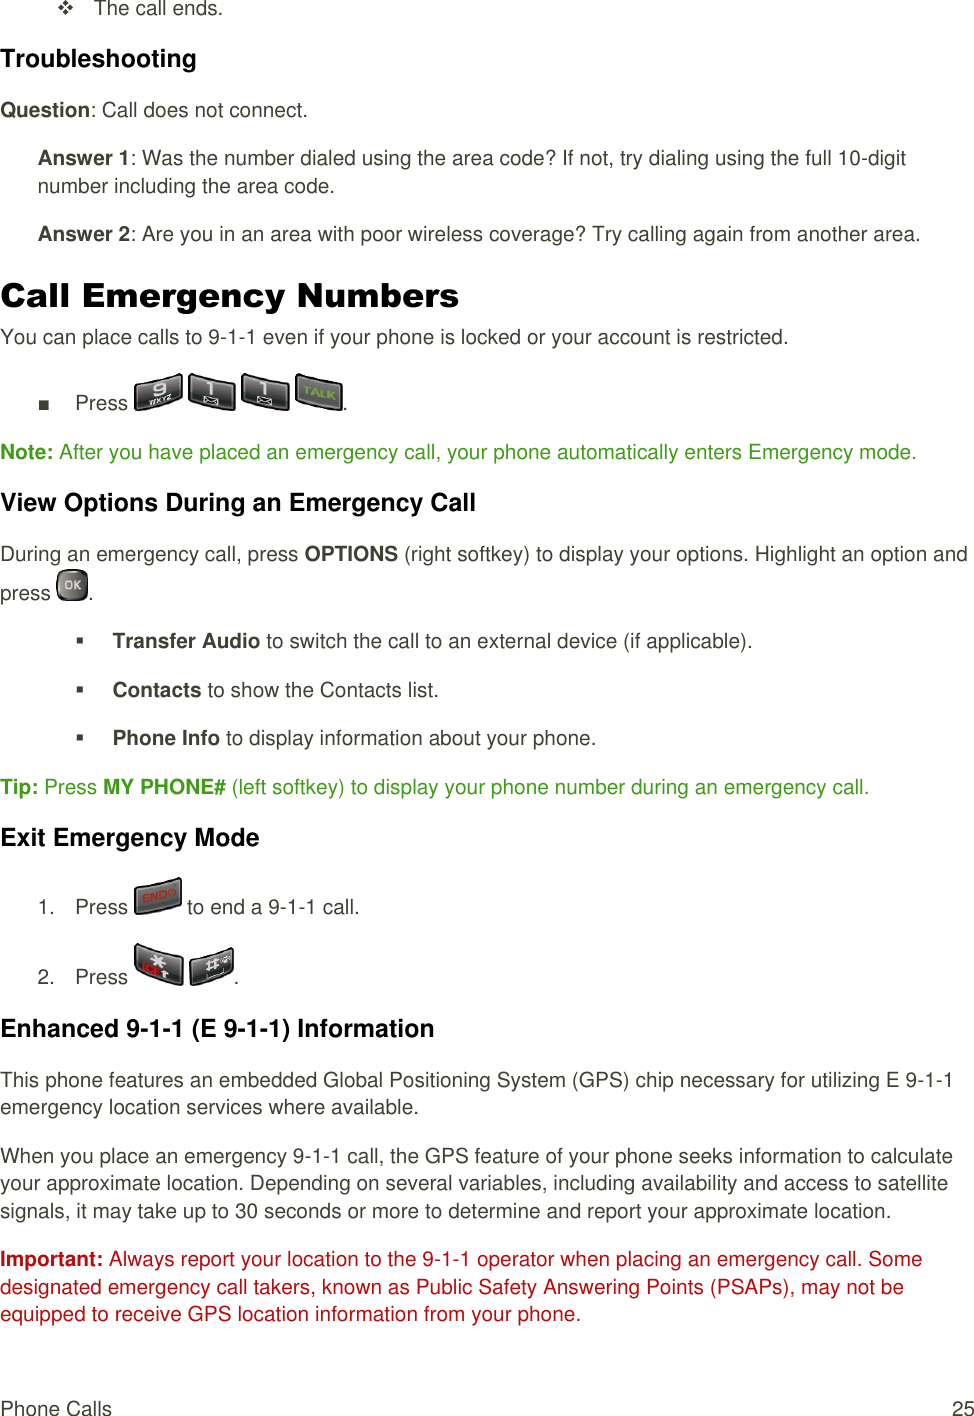  Phone Calls  25   The call ends. Troubleshooting Question: Call does not connect. Answer 1: Was the number dialed using the area code? If not, try dialing using the full 10-digit number including the area code. Answer 2: Are you in an area with poor wireless coverage? Try calling again from another area. Call Emergency Numbers You can place calls to 9-1-1 even if your phone is locked or your account is restricted. ■  Press        . Note: After you have placed an emergency call, your phone automatically enters Emergency mode. View Options During an Emergency Call During an emergency call, press OPTIONS (right softkey) to display your options. Highlight an option and press  .  Transfer Audio to switch the call to an external device (if applicable).  Contacts to show the Contacts list.  Phone Info to display information about your phone. Tip: Press MY PHONE# (left softkey) to display your phone number during an emergency call. Exit Emergency Mode 1.  Press   to end a 9-1-1 call. 2.  Press    . Enhanced 9-1-1 (E 9-1-1) Information This phone features an embedded Global Positioning System (GPS) chip necessary for utilizing E 9-1-1 emergency location services where available. When you place an emergency 9-1-1 call, the GPS feature of your phone seeks information to calculate your approximate location. Depending on several variables, including availability and access to satellite signals, it may take up to 30 seconds or more to determine and report your approximate location. Important: Always report your location to the 9-1-1 operator when placing an emergency call. Some designated emergency call takers, known as Public Safety Answering Points (PSAPs), may not be equipped to receive GPS location information from your phone. 